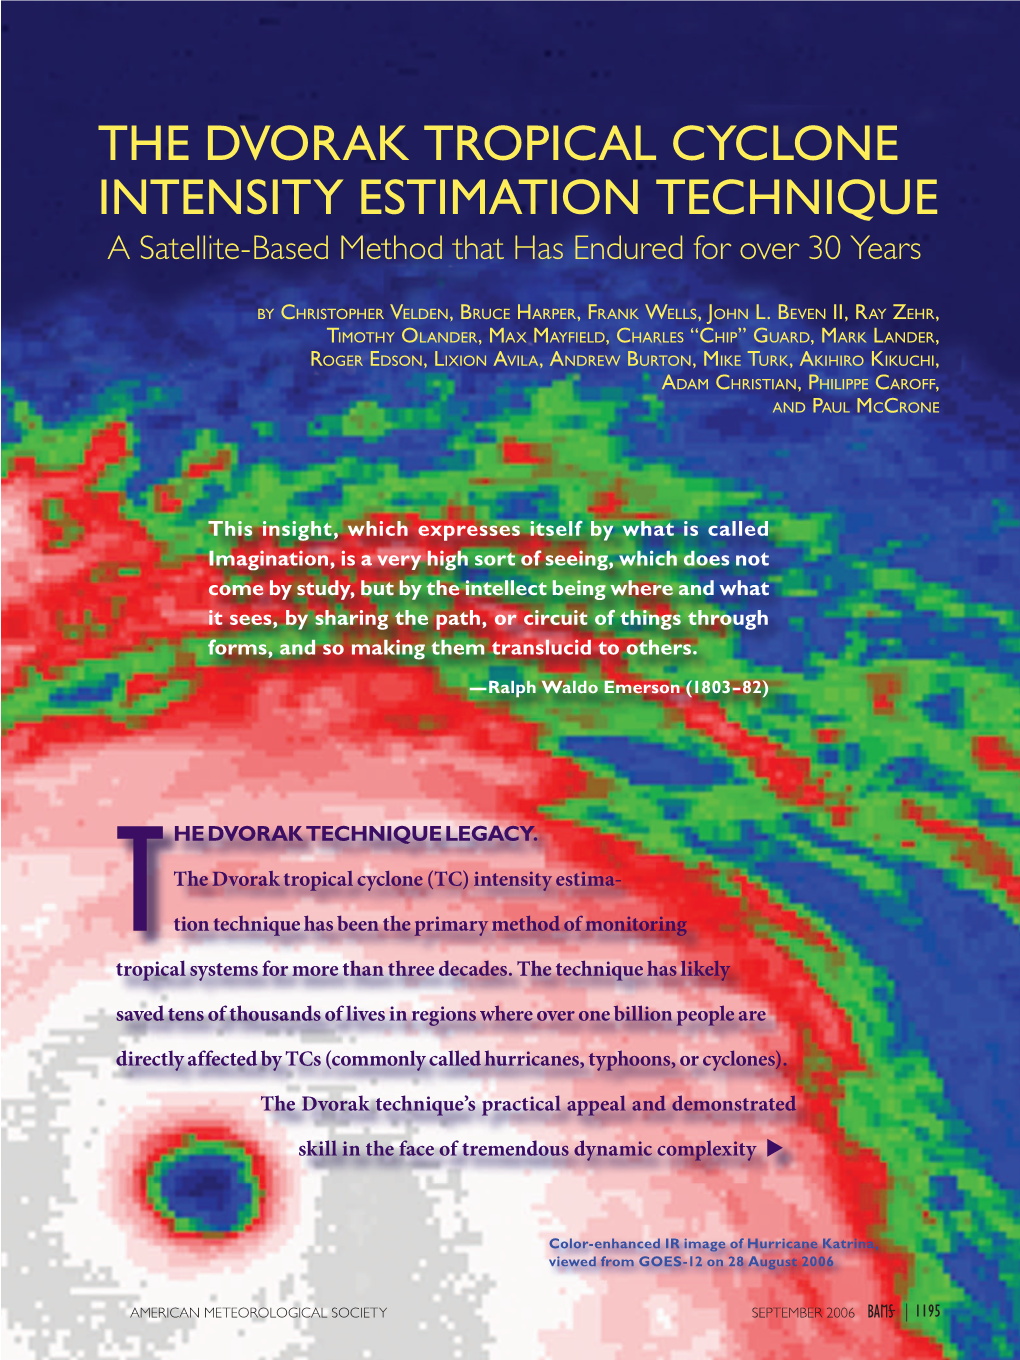 THE DVORAK TROPICAL CYCLONE INTENSITY ESTIMATION TECHNIQUE a Satellite-Based Method That Has Endured for Over 30 Years